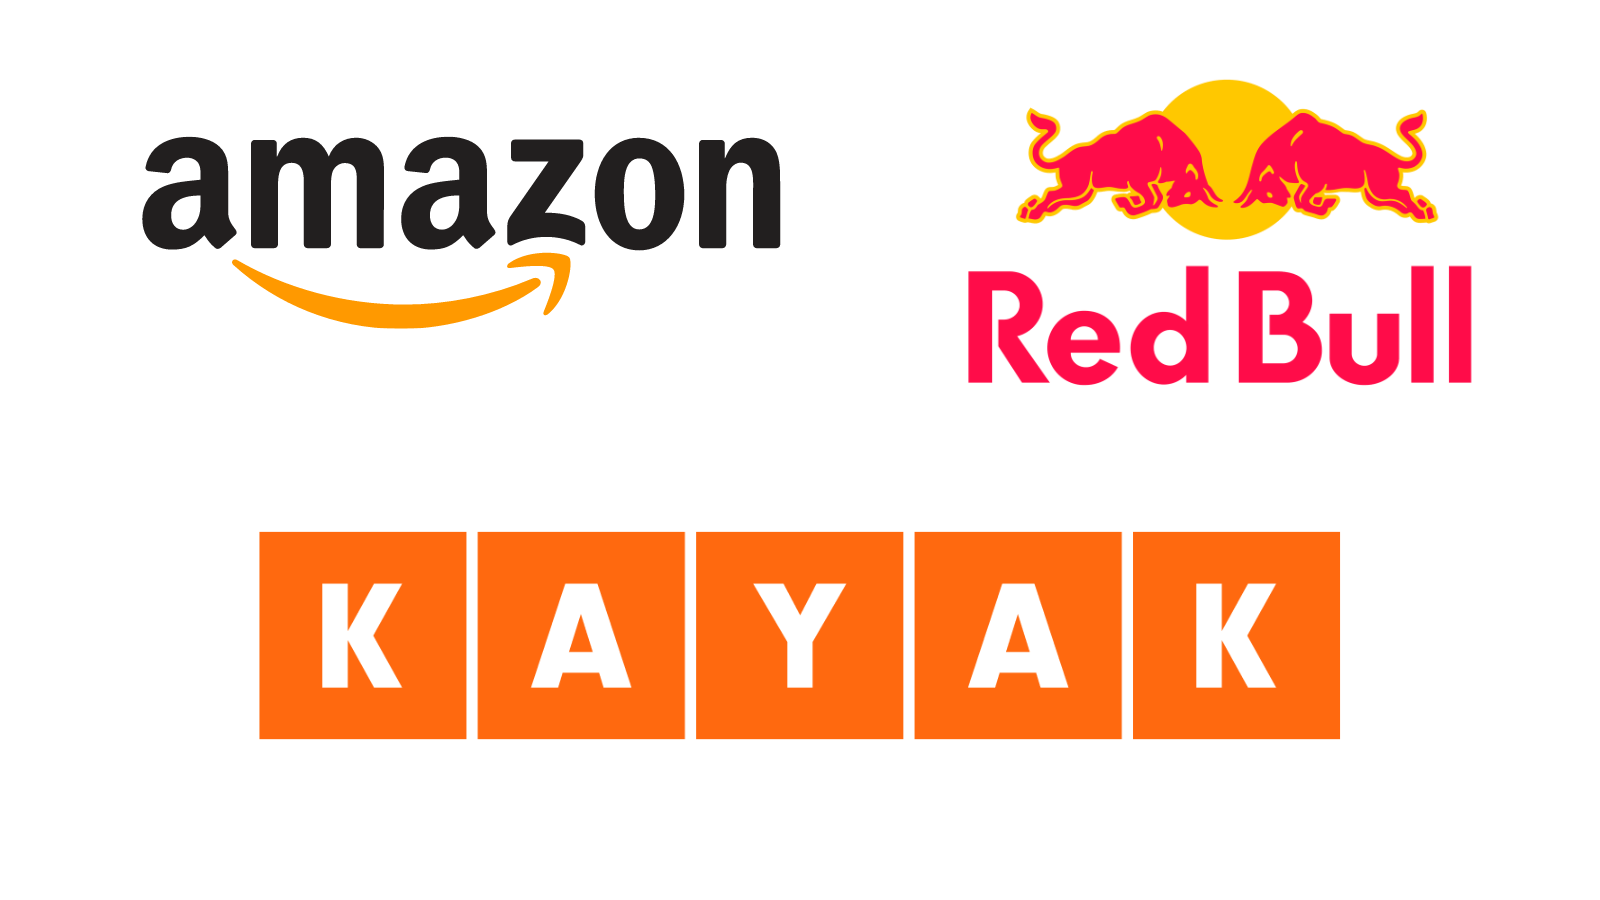 The logos for Amazon, Red Bull, and Kayak